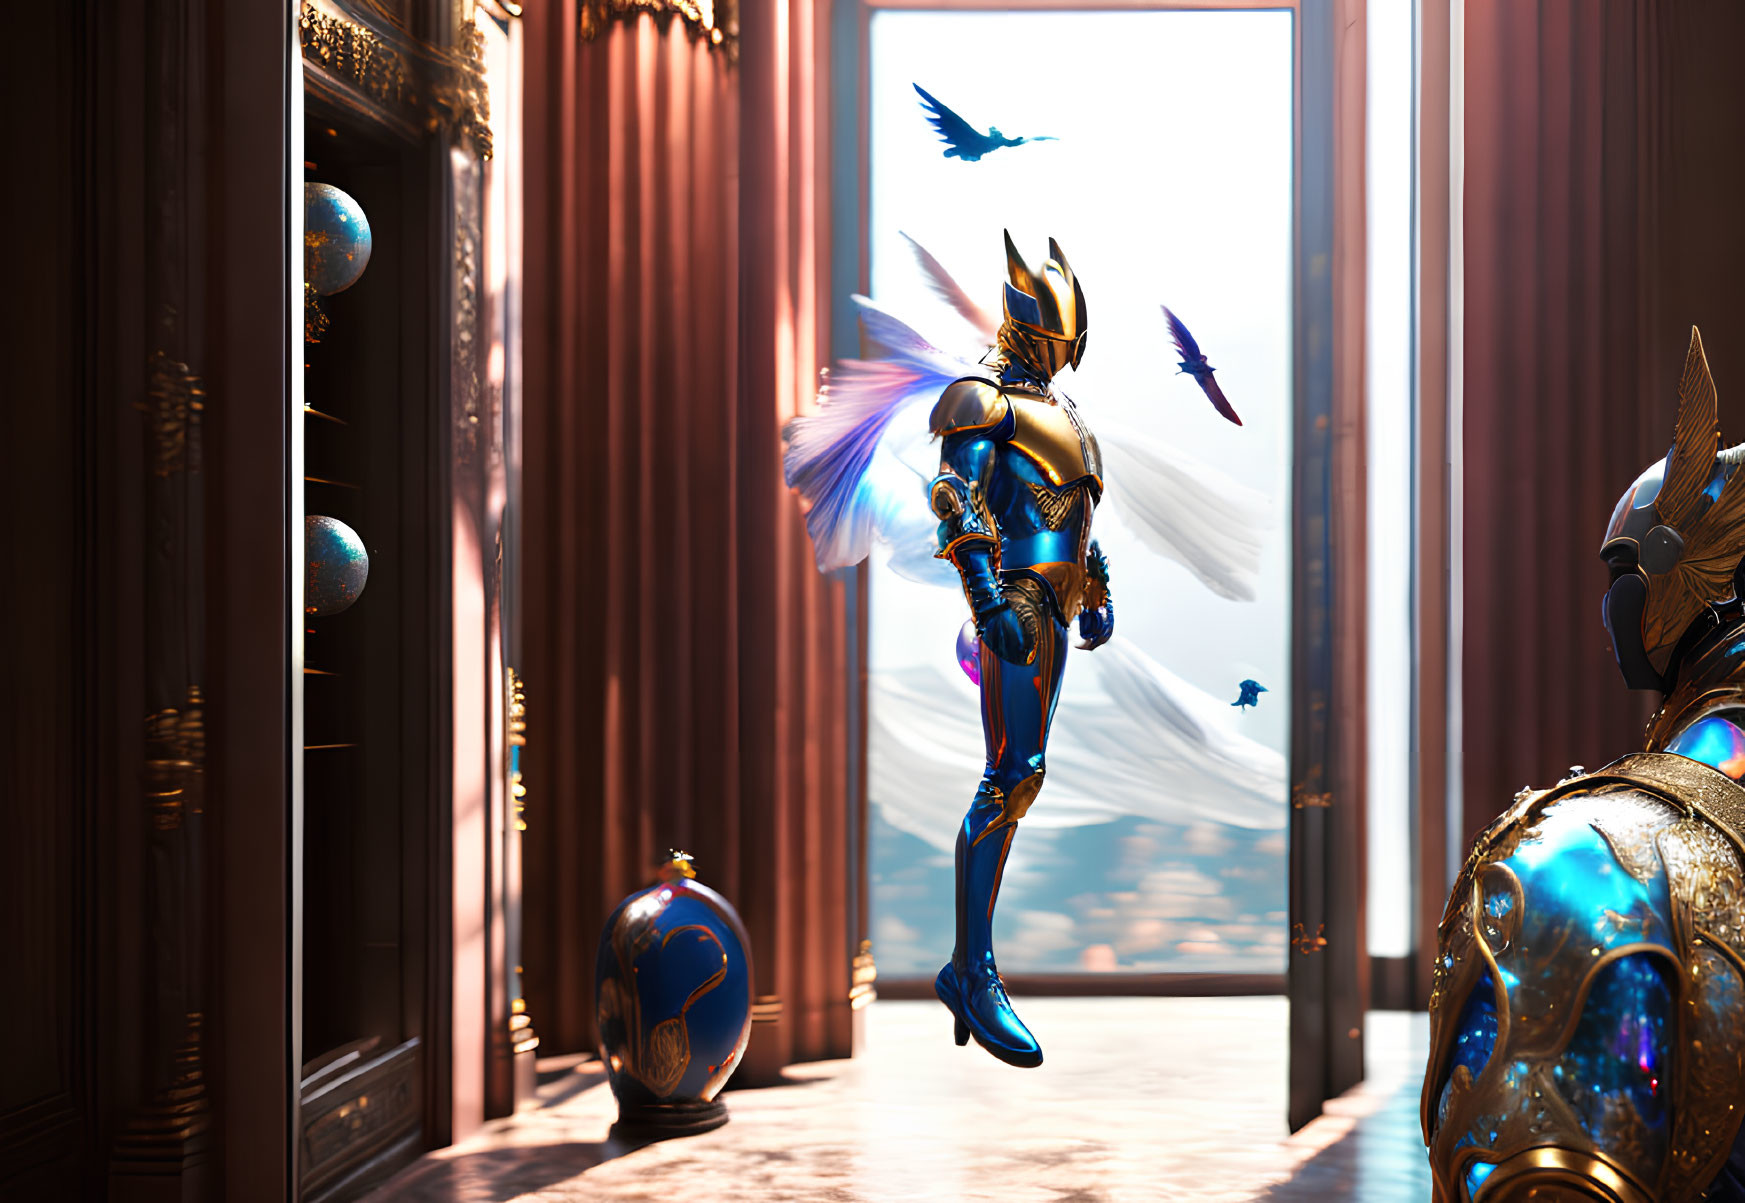 Golden-armored knight levitates in grand hall with ornate columns and bluebirds.